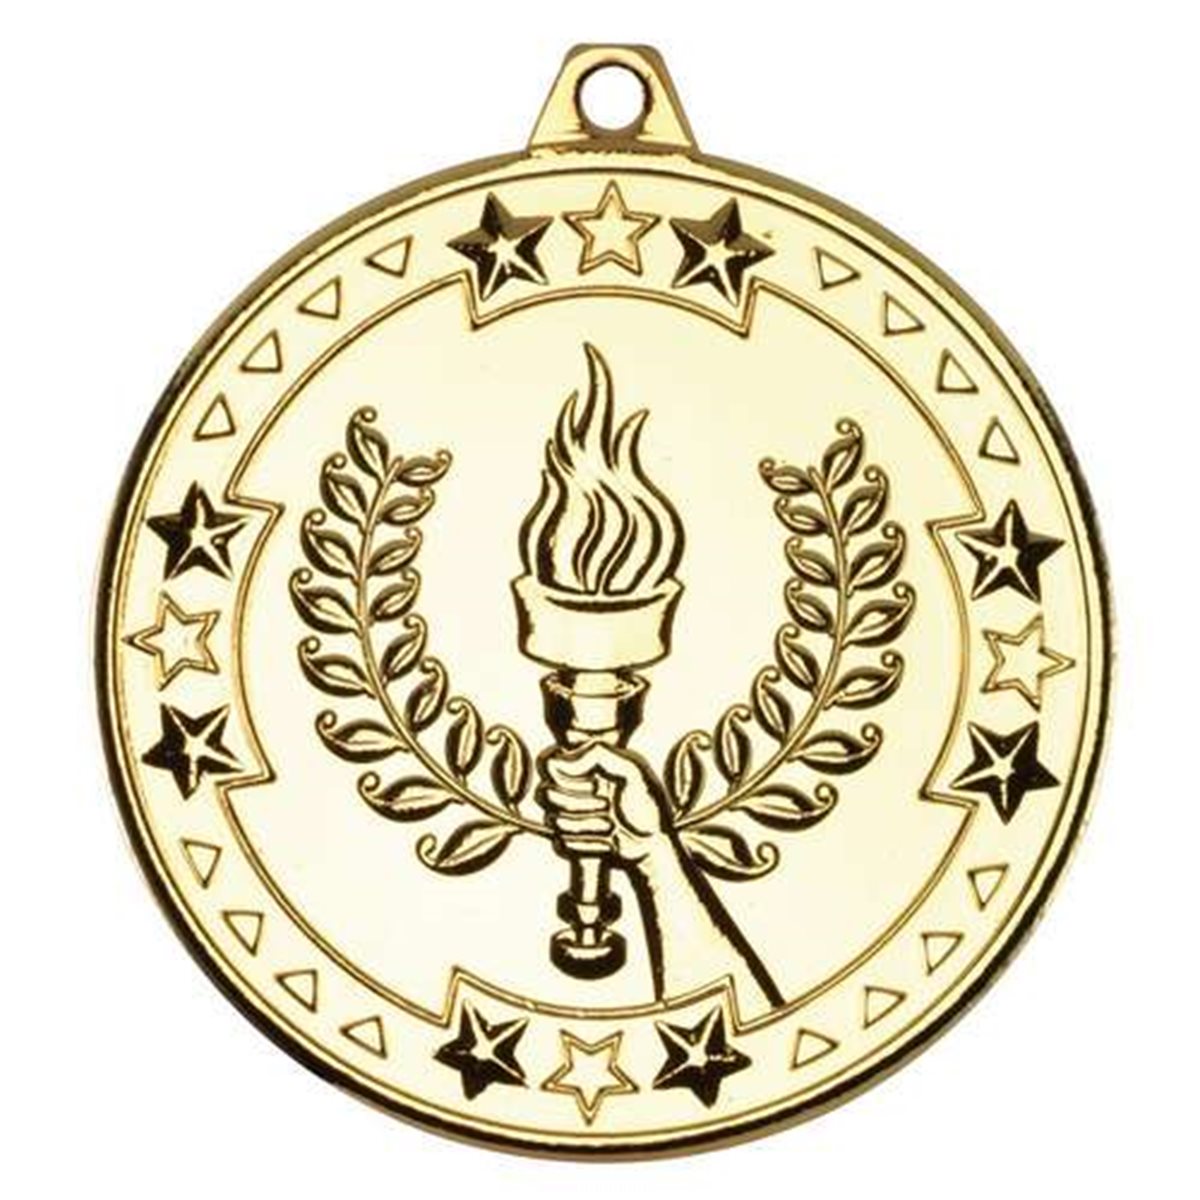 Victory Torch 50mm Medal in Gold, Silver & Bronze M73